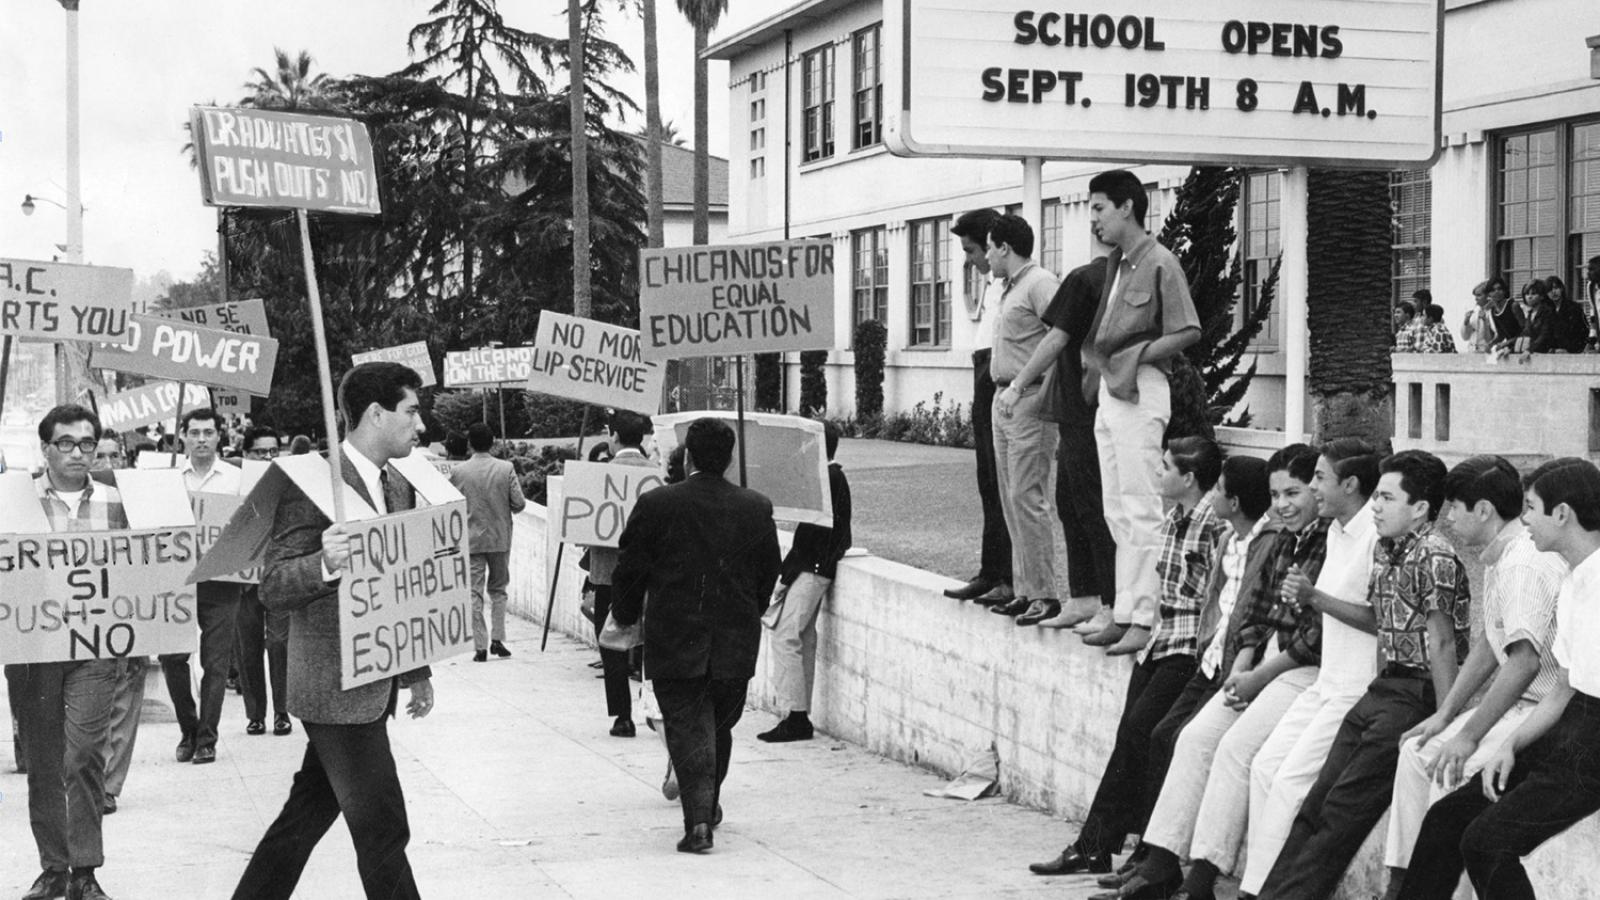 Latino students protesting in Los Angeles during the 1960s